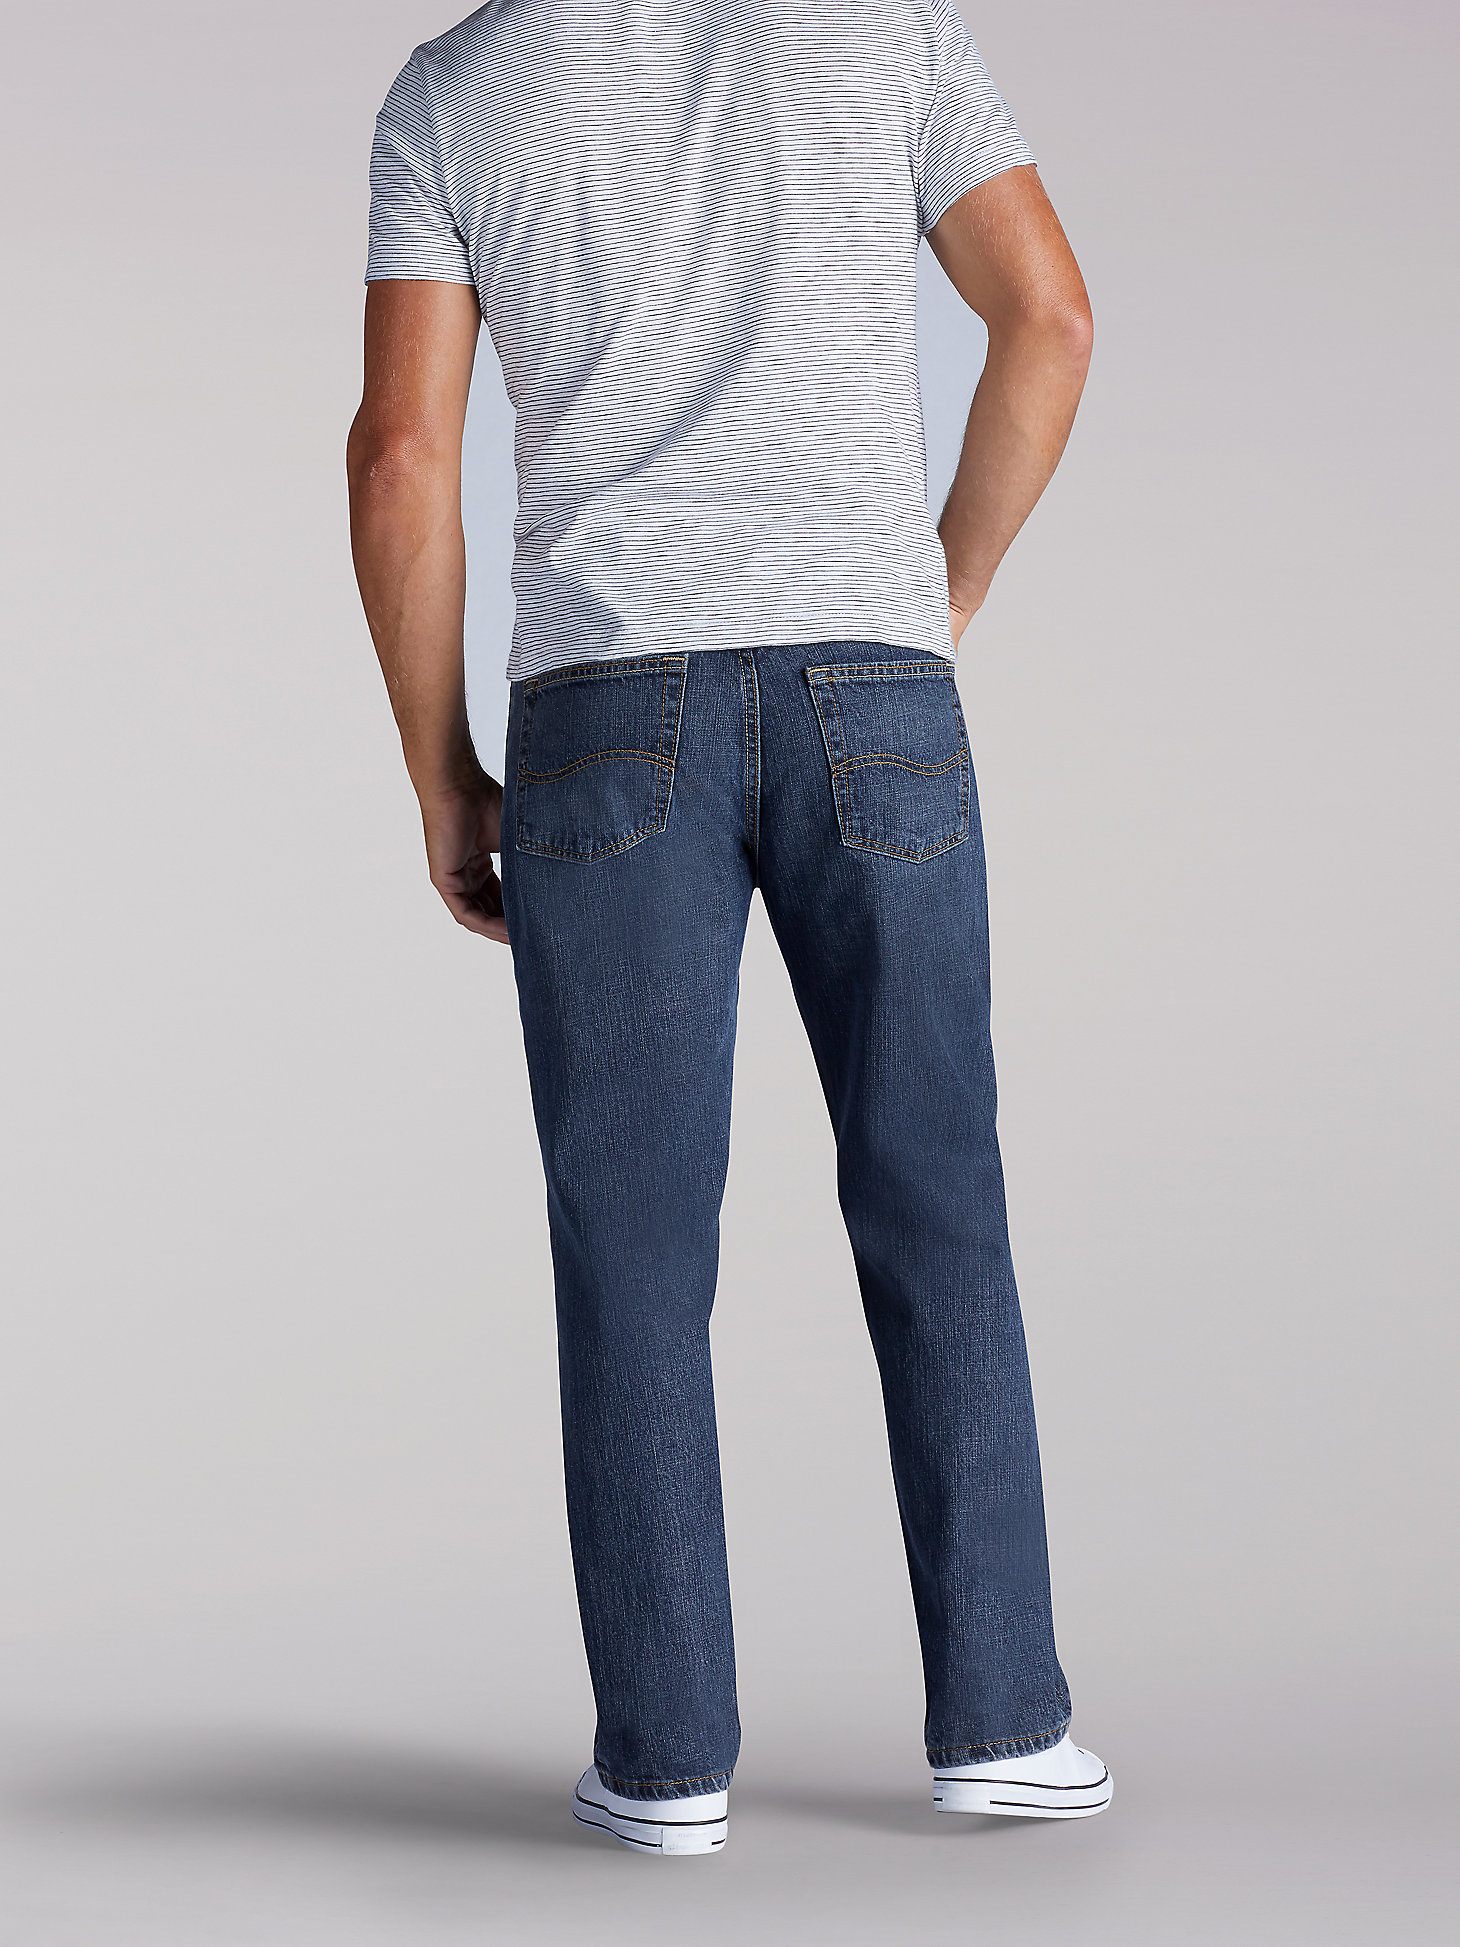 Men’s Premium Select Relaxed Straight Leg Jeans in Calypso alternative view 1